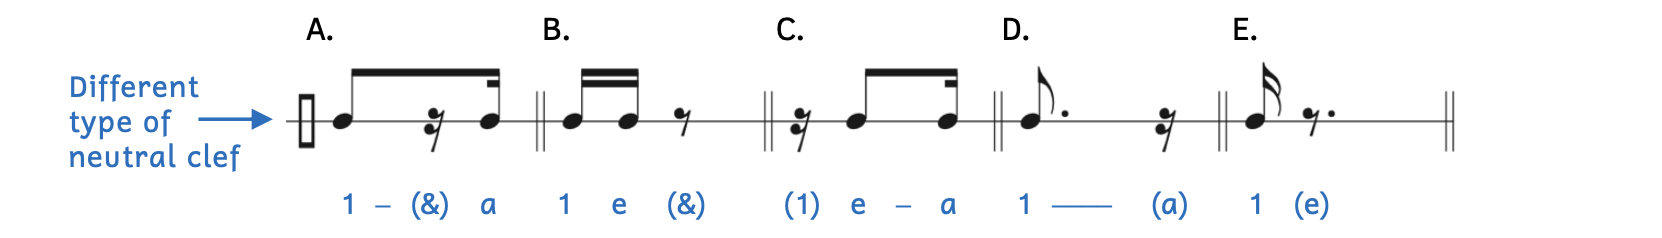 Examples of notes and rests within one beat. A different type of neutral clef is shown. Example A is an eighth note, sixteenth rest and sixteenth note. The eighth note and sixteenth note are beamed together. Example B is two sixteenth notes beamed together followed by an eighth rest. Example C is a sixteenth rest followed by an eighth note and sixteenth note. The eighth note and sixteenth note are beamed together. Example D is a dotted eighth note followed by a sixteenth rest. Example E is a sixteenth note followed by a dotted eighth rest. Listen to the rhythm syllables from the sound clip below.